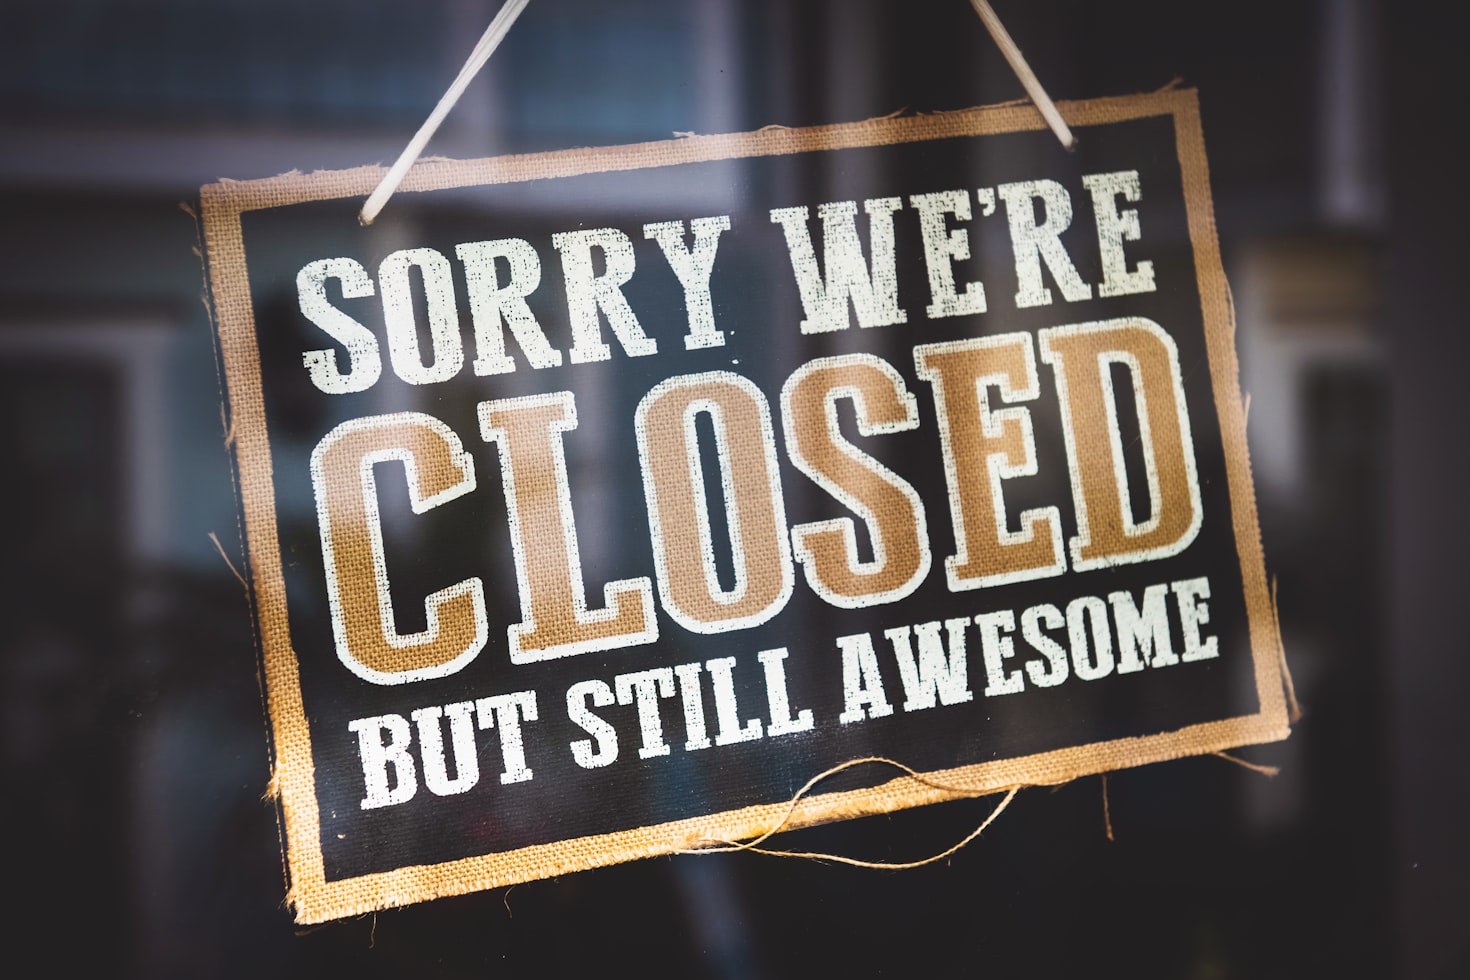 We are closed this Bank Holiday